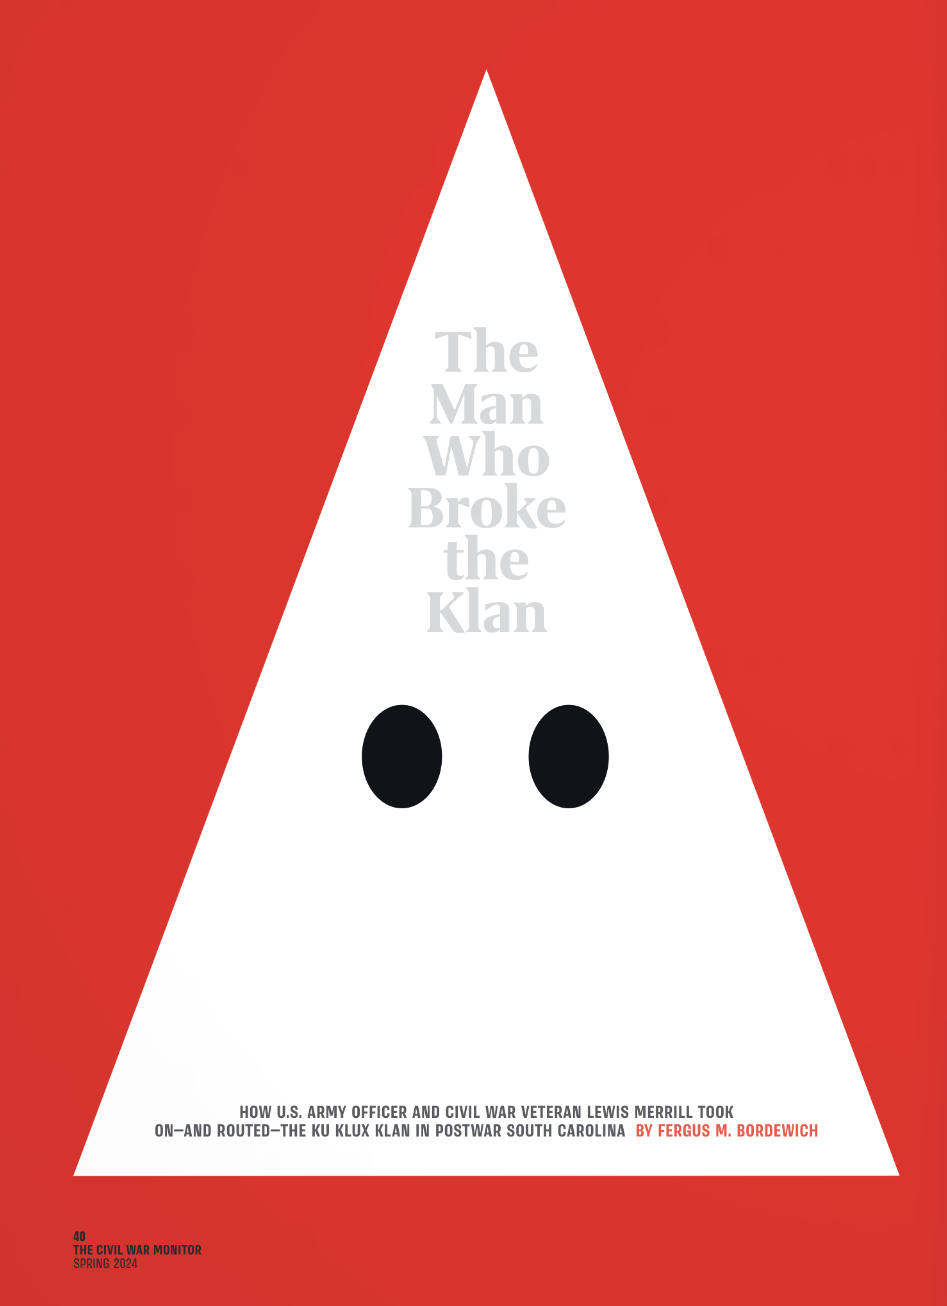 The Man Who Broke the Klan hero image from print publication